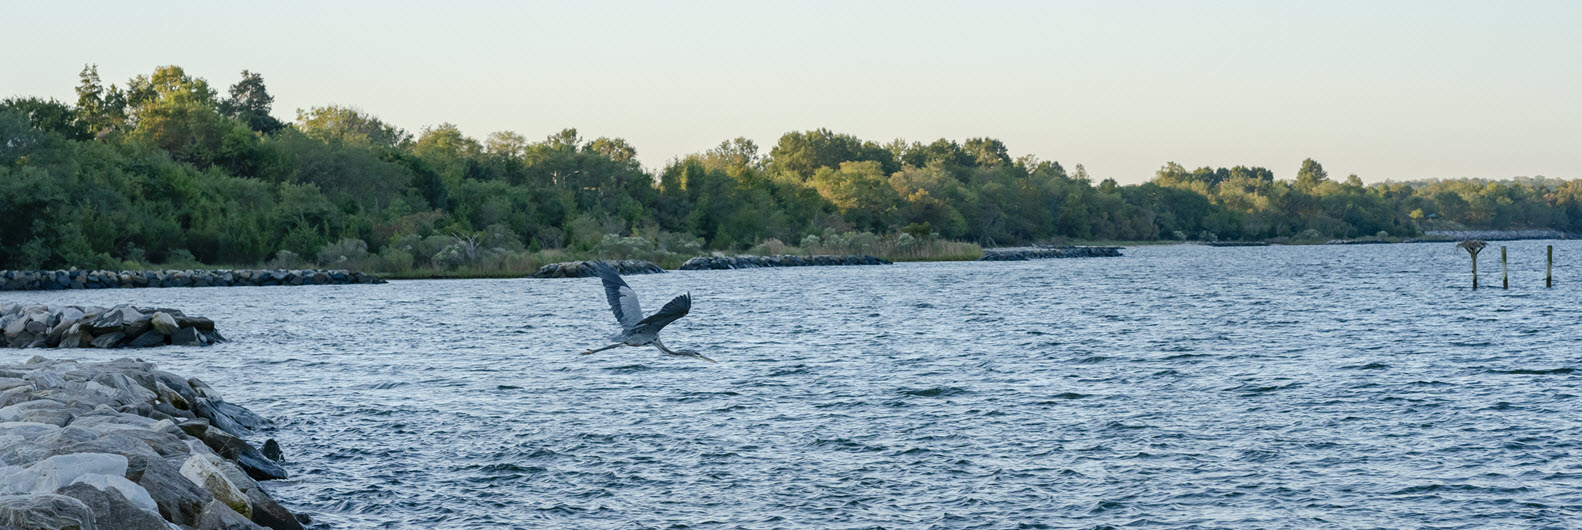 large blue heron flies across the patuxent river off of Asbury Solomons pier with the sun rising in background